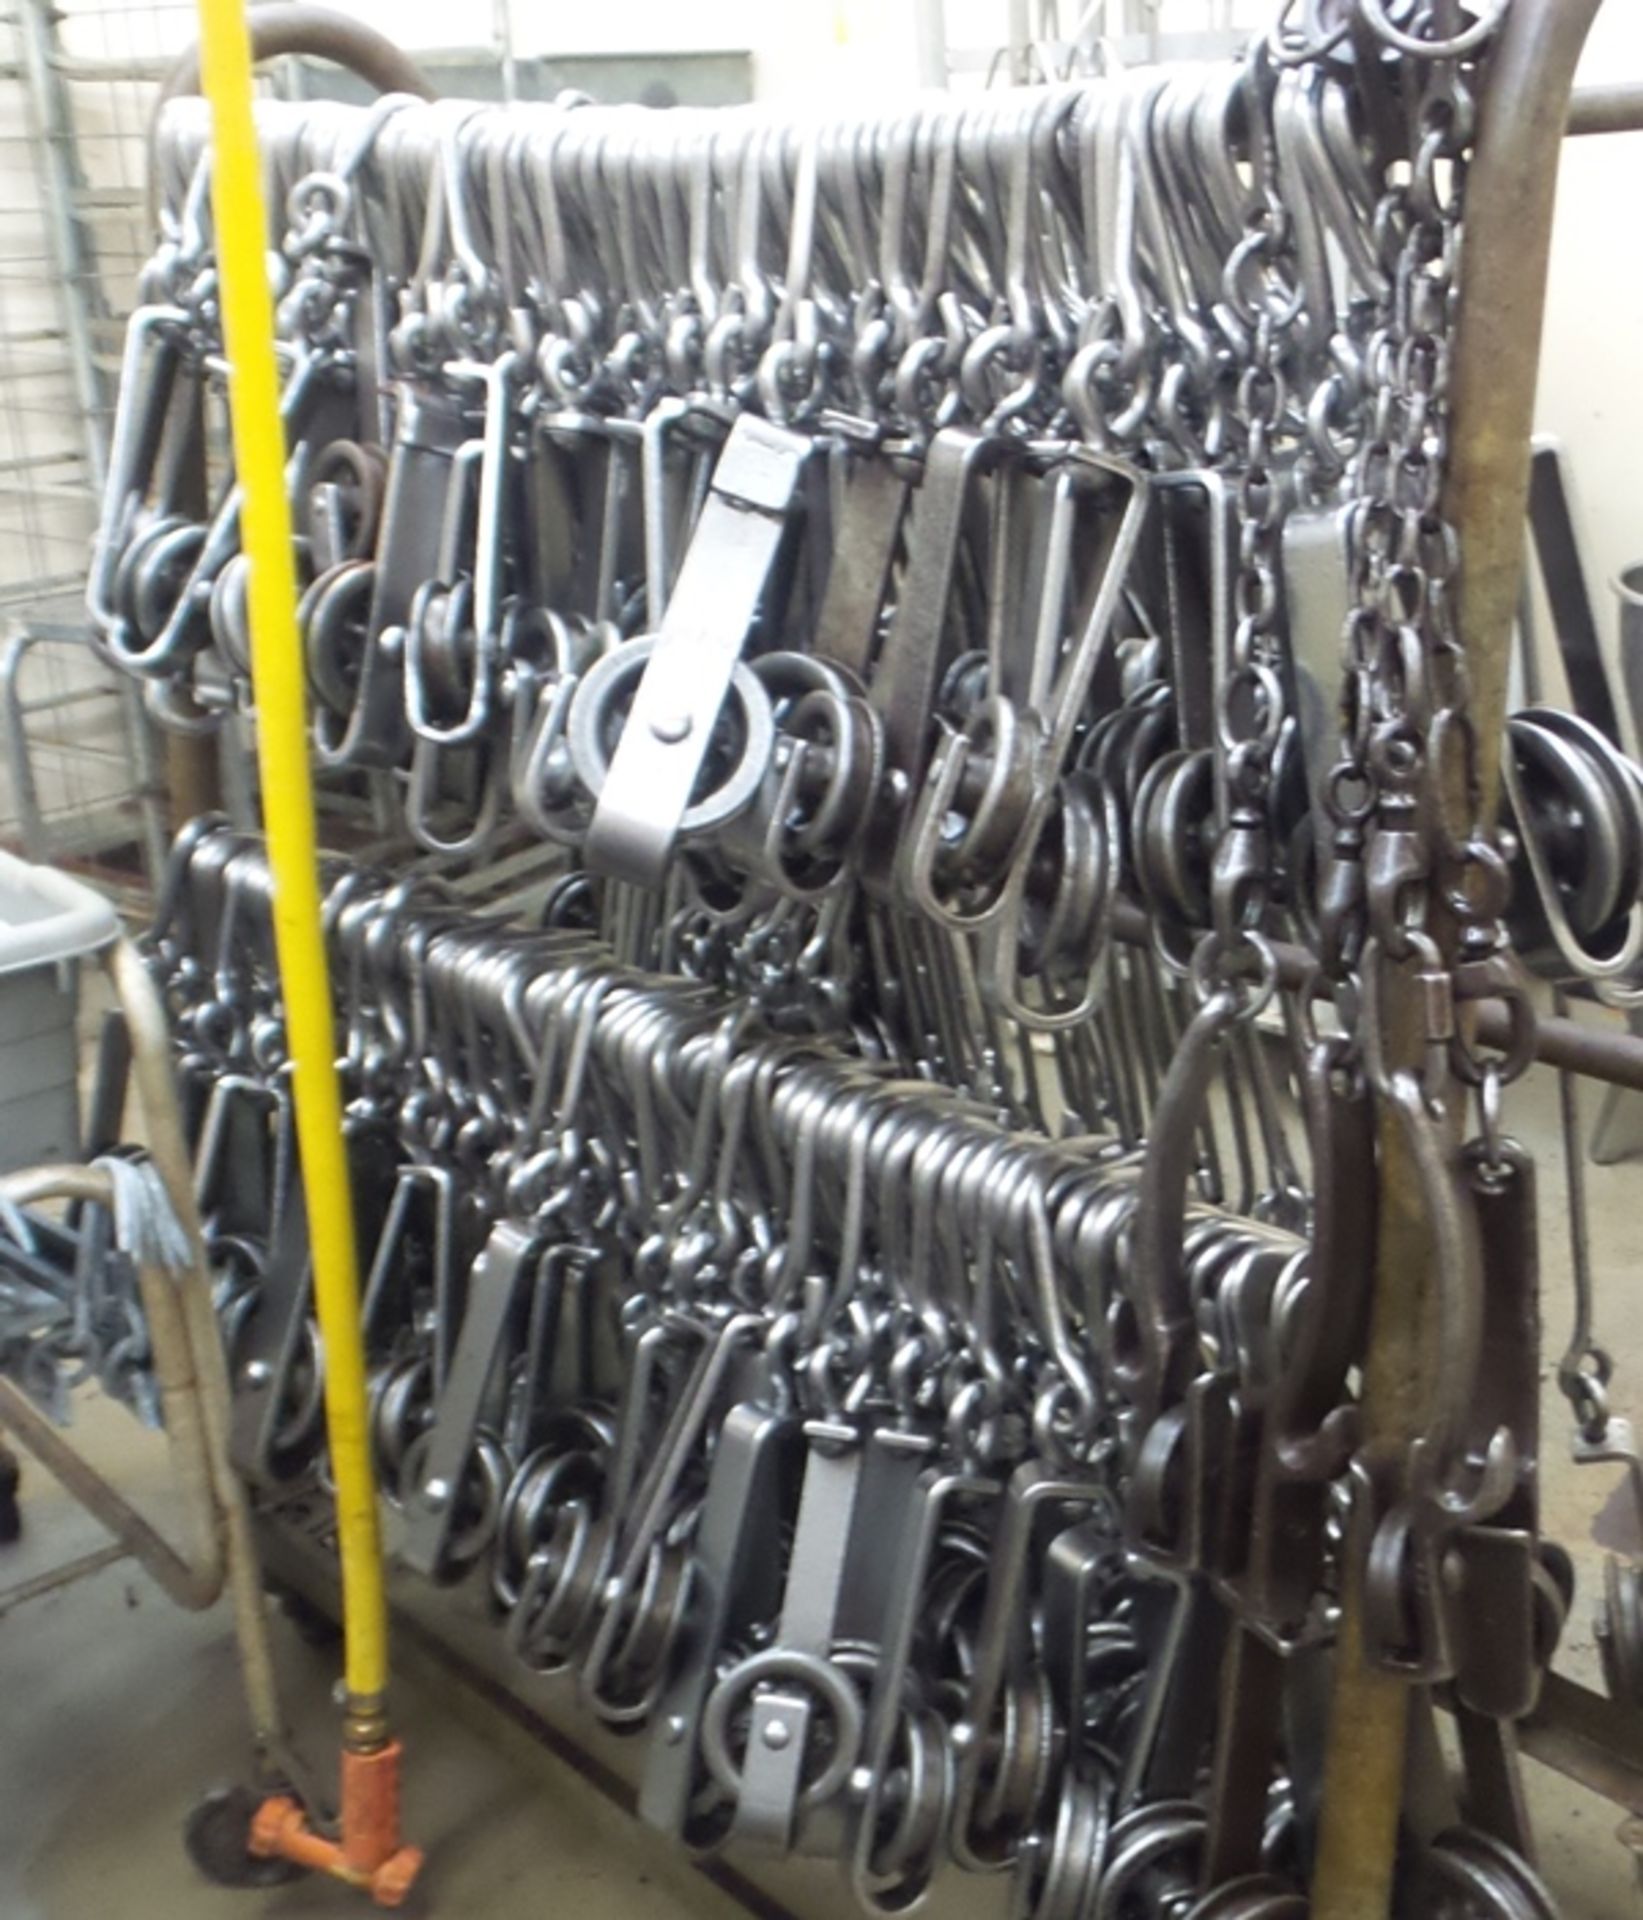 Short Beef Hooks with Trolley, 5" long hooks(All Funds Must Be Received by Friday, December 6th,